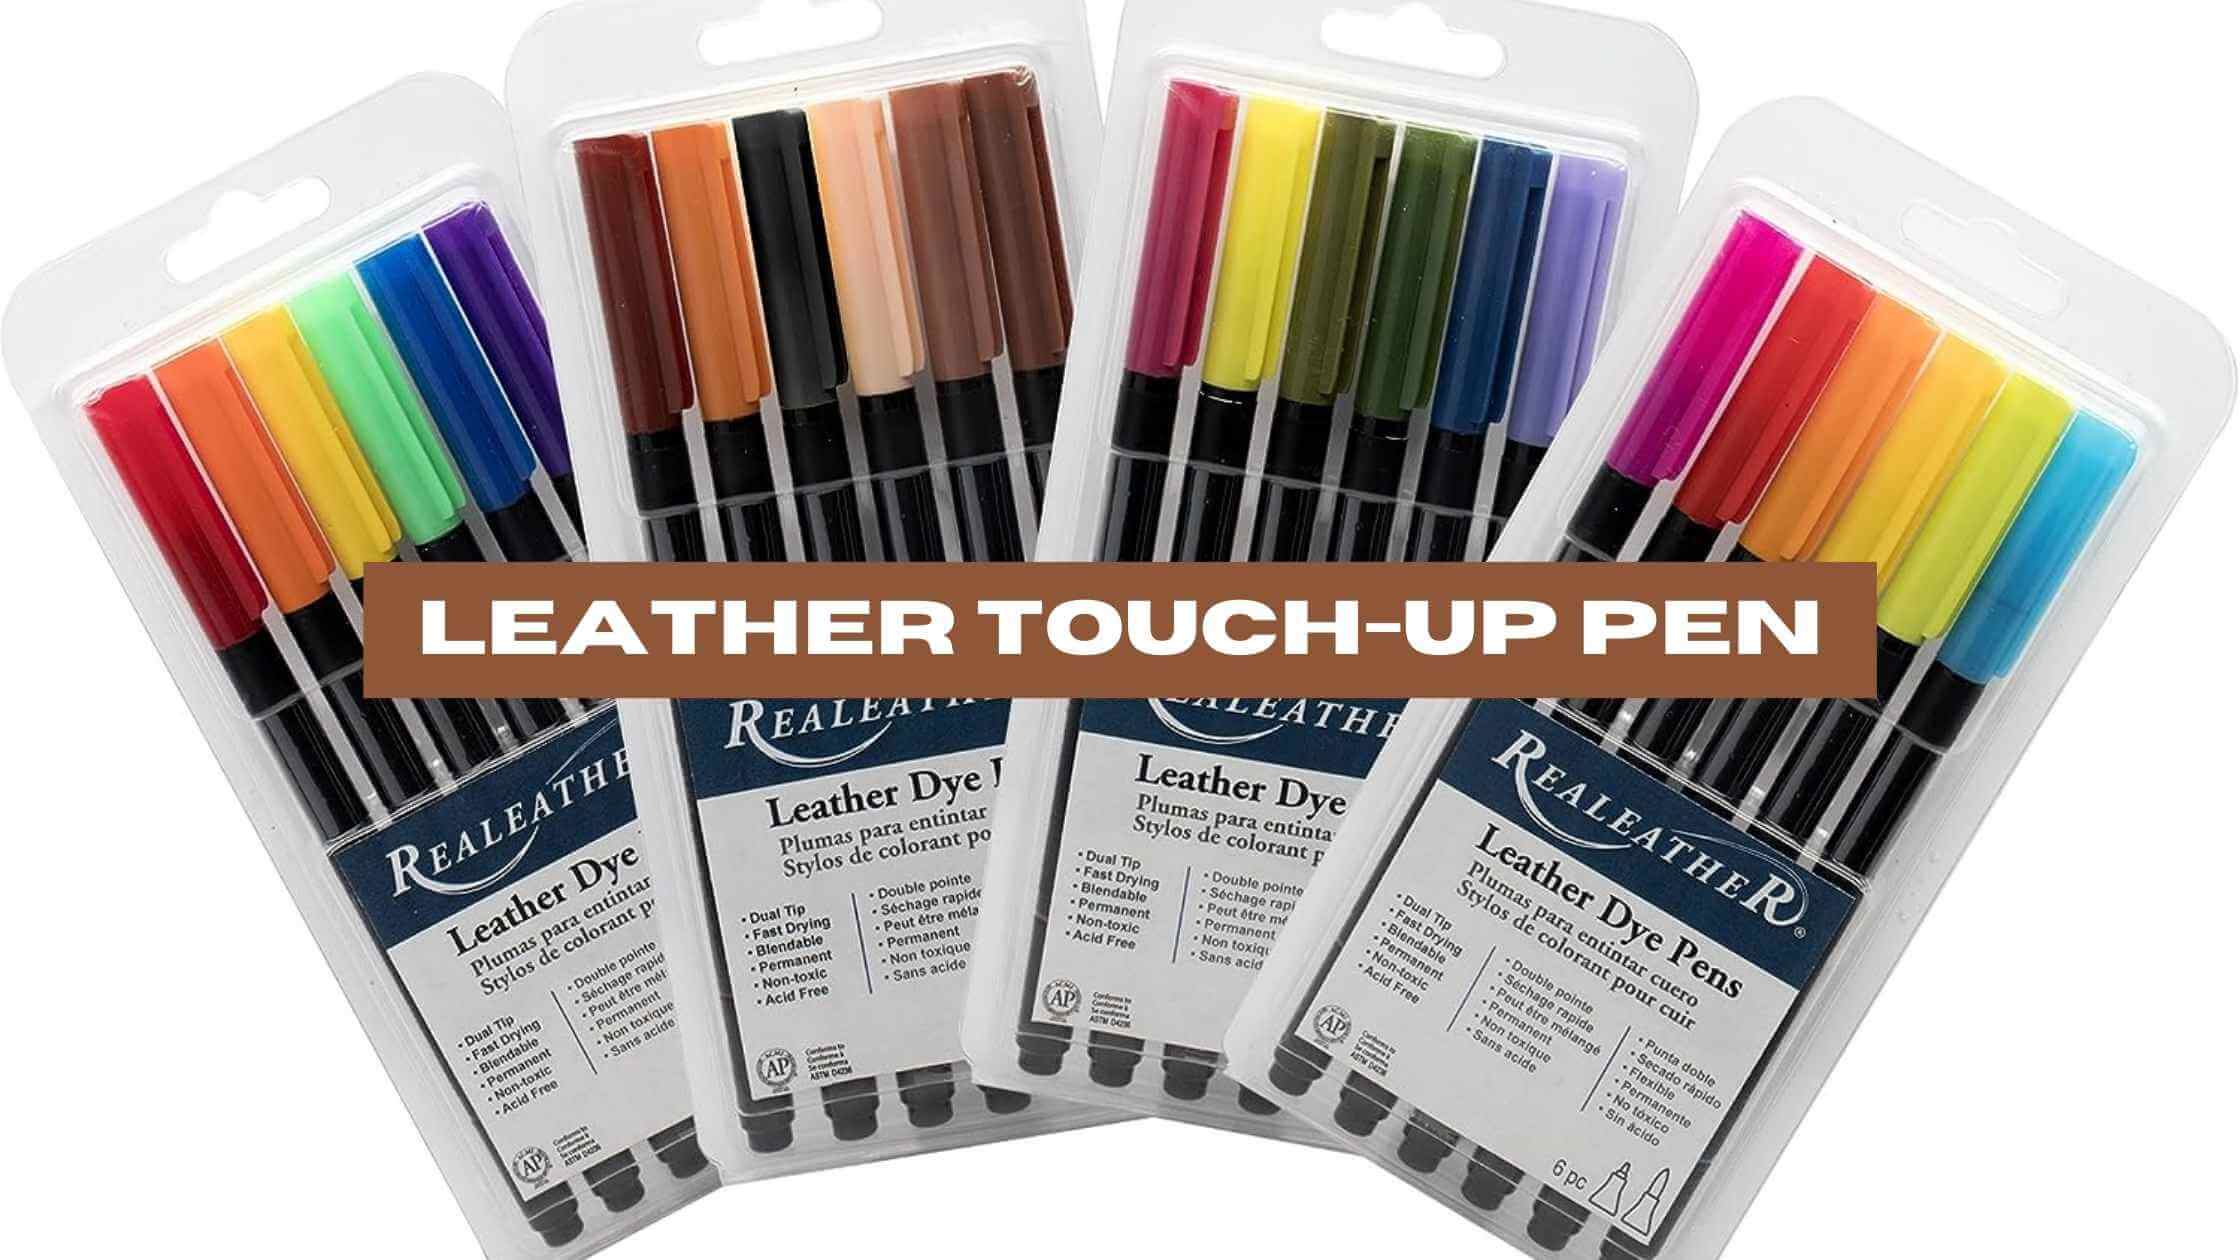 Leather Touch-Up Pen